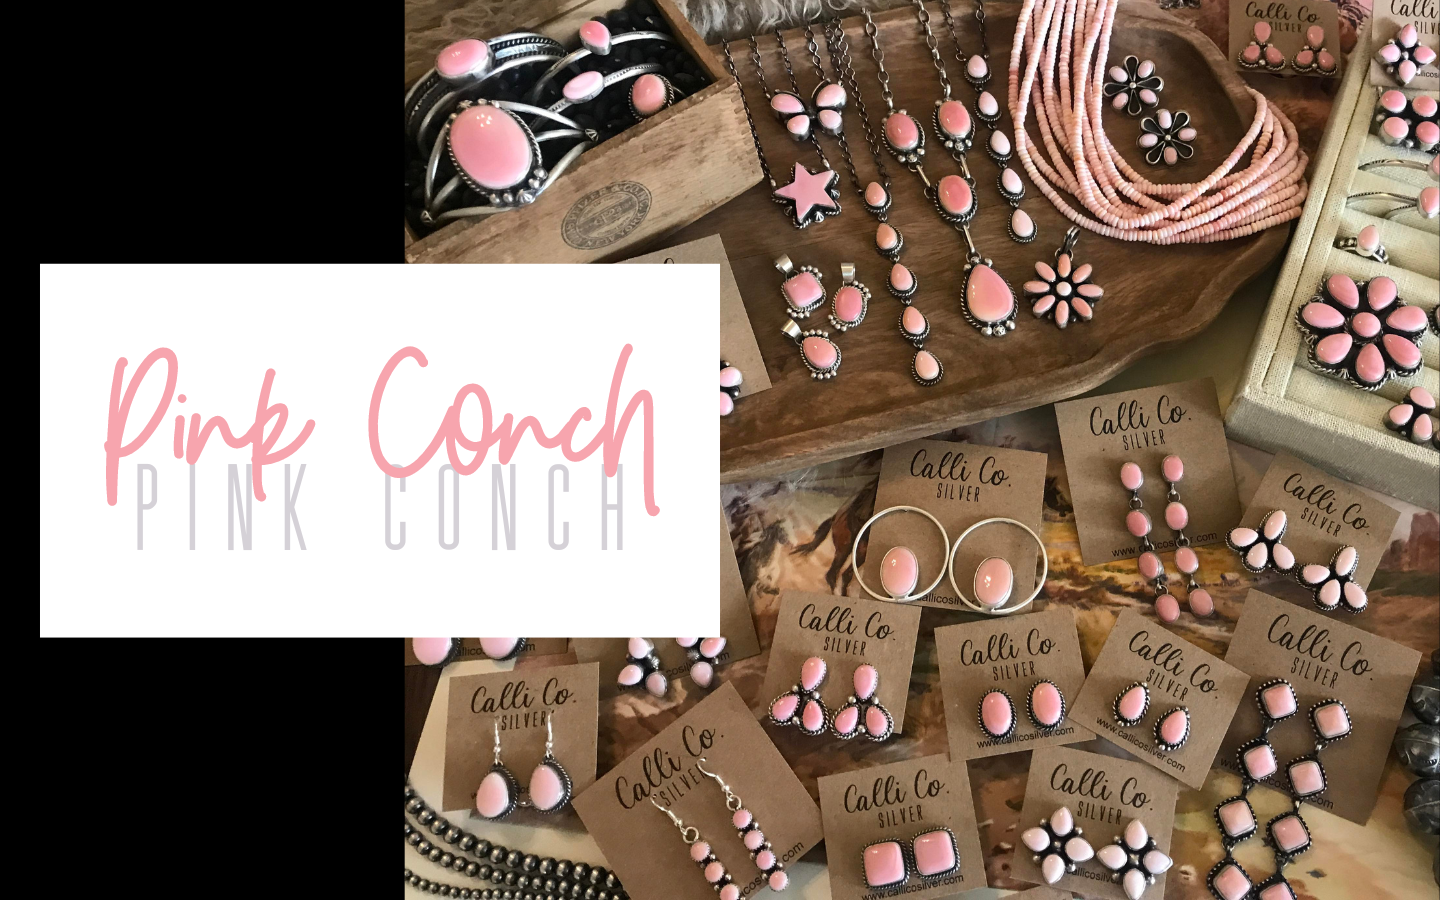 SHOP THE PINK CONCH COLLECTION  | Calli Co. Silver | Handmade Sterling Silver and Turquoise Jewelry | Located in Fort Worth, TX